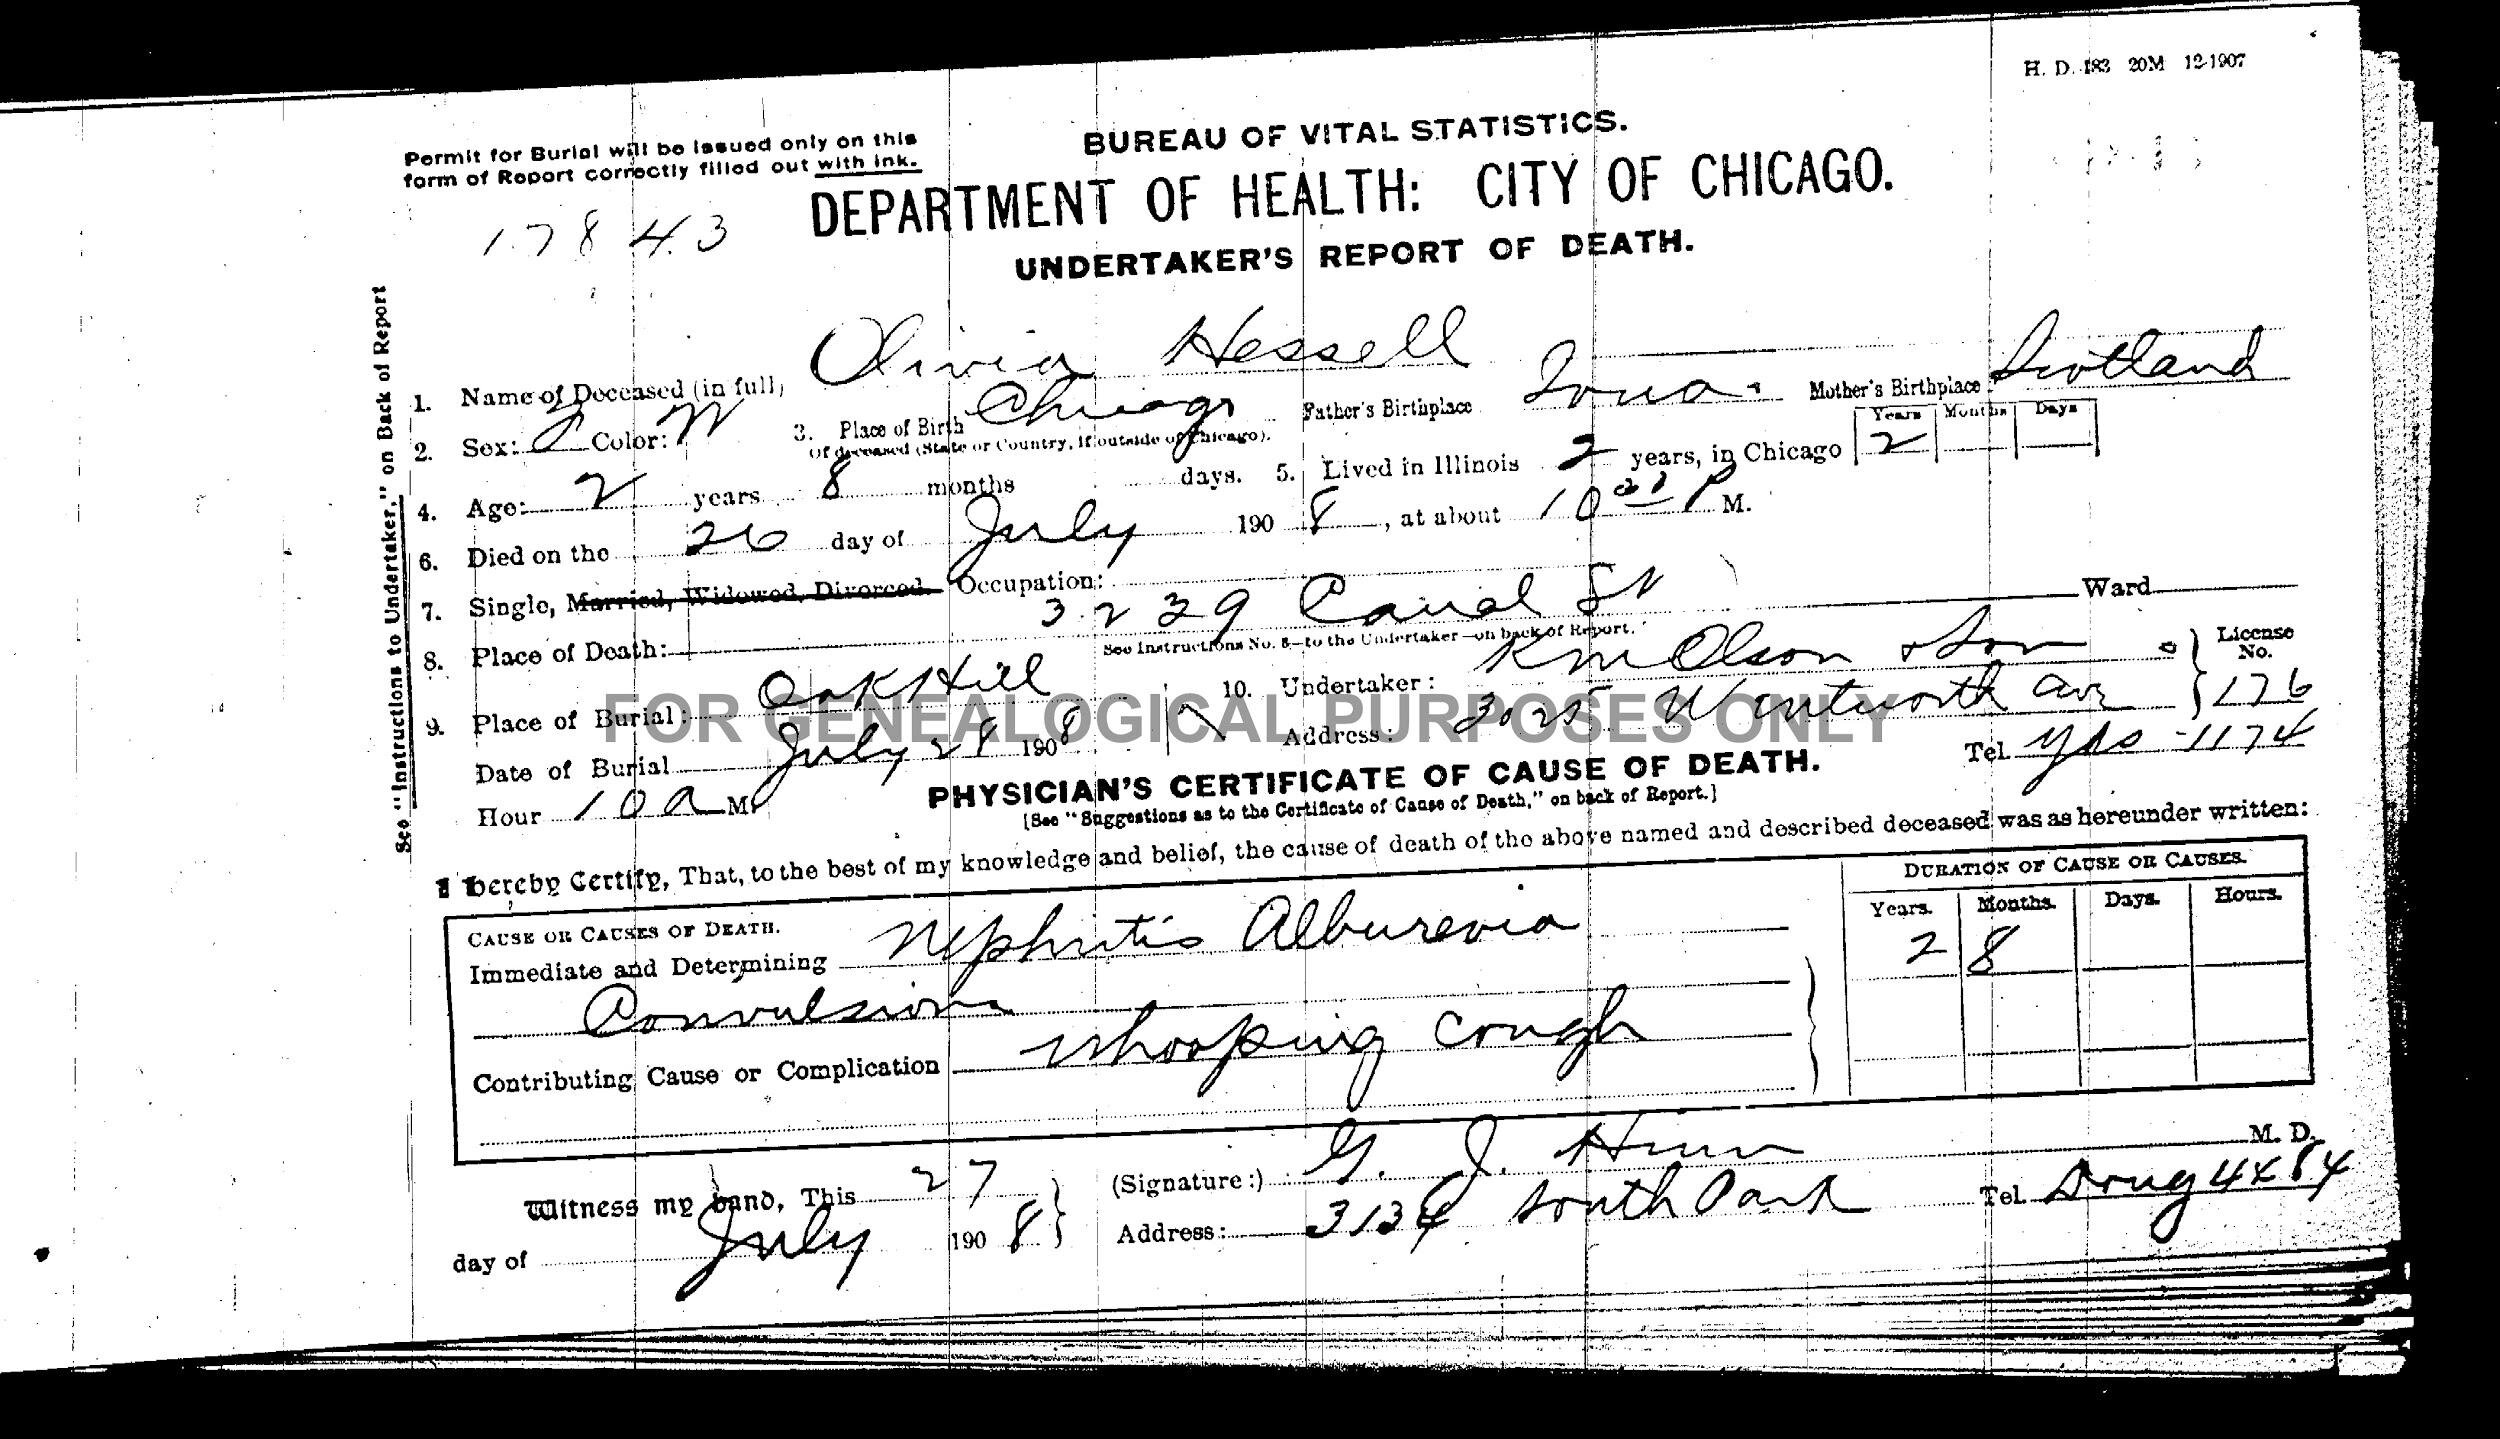 Death certificate for Olivia Helen Hessell listing an address of 3239 S. Canal St. Chicago and mother's place of birth as Scotland.